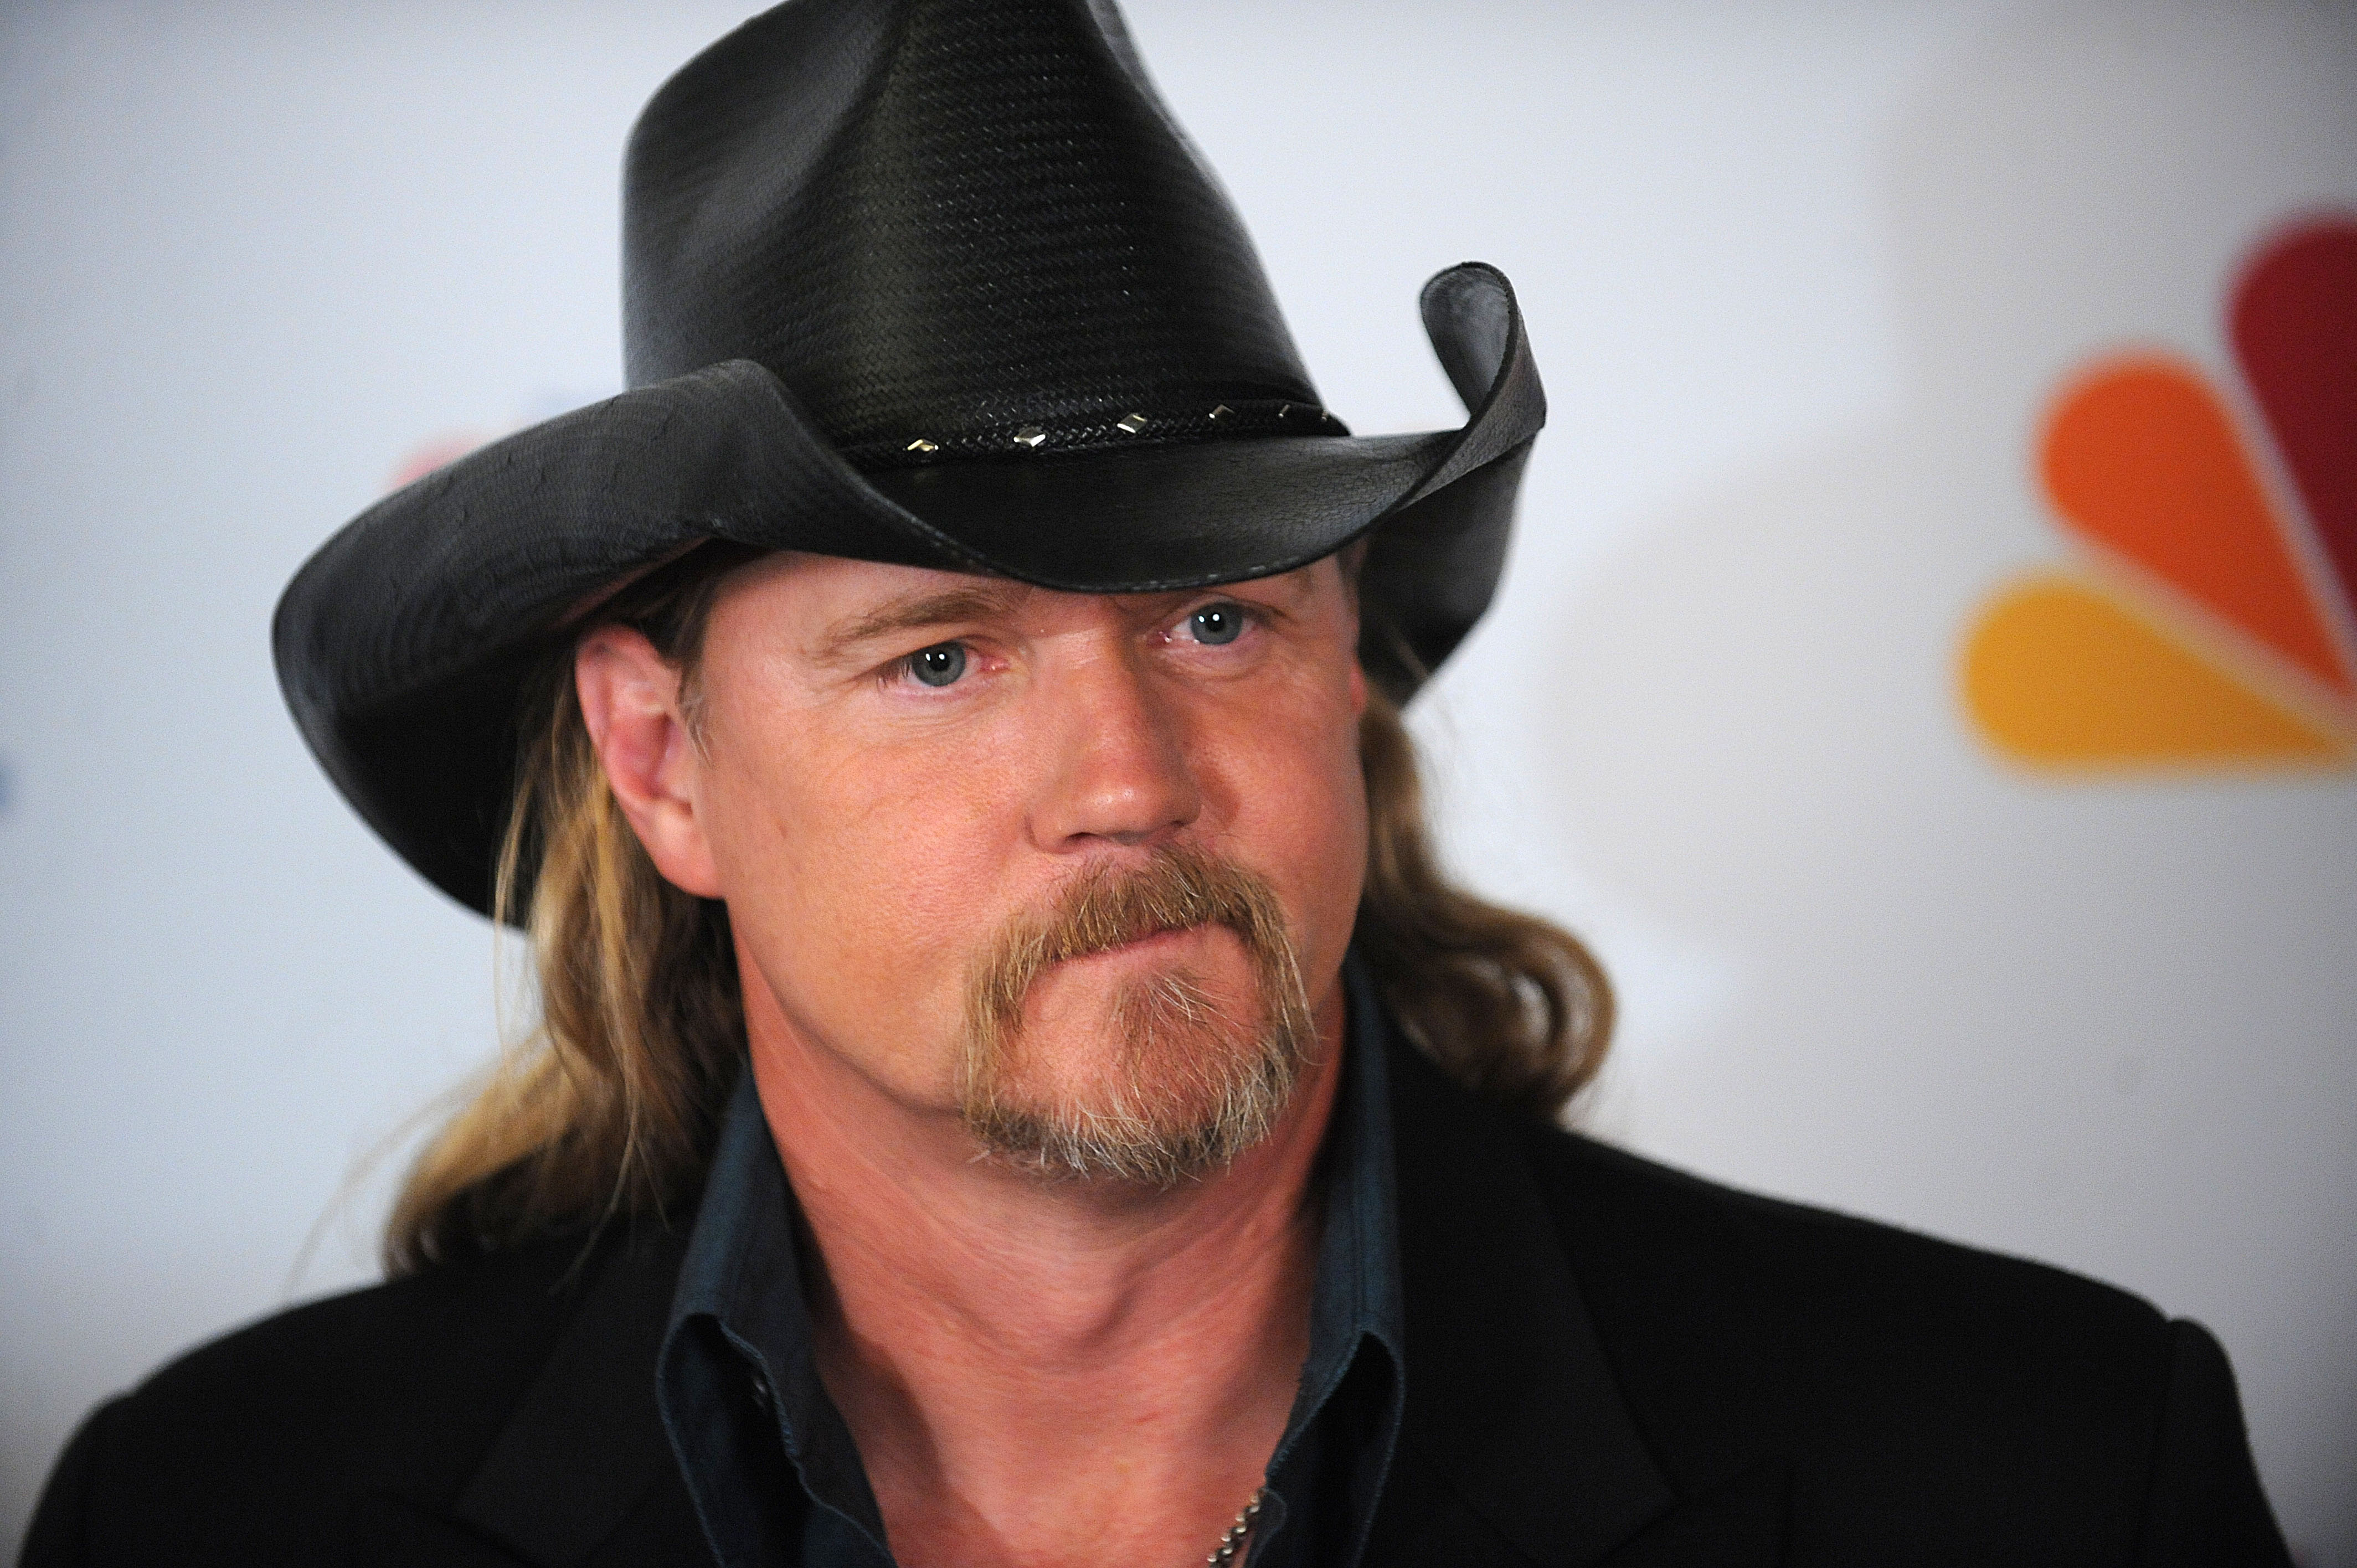 More Pictures Of Trace Adkins. trace adkins movies. 